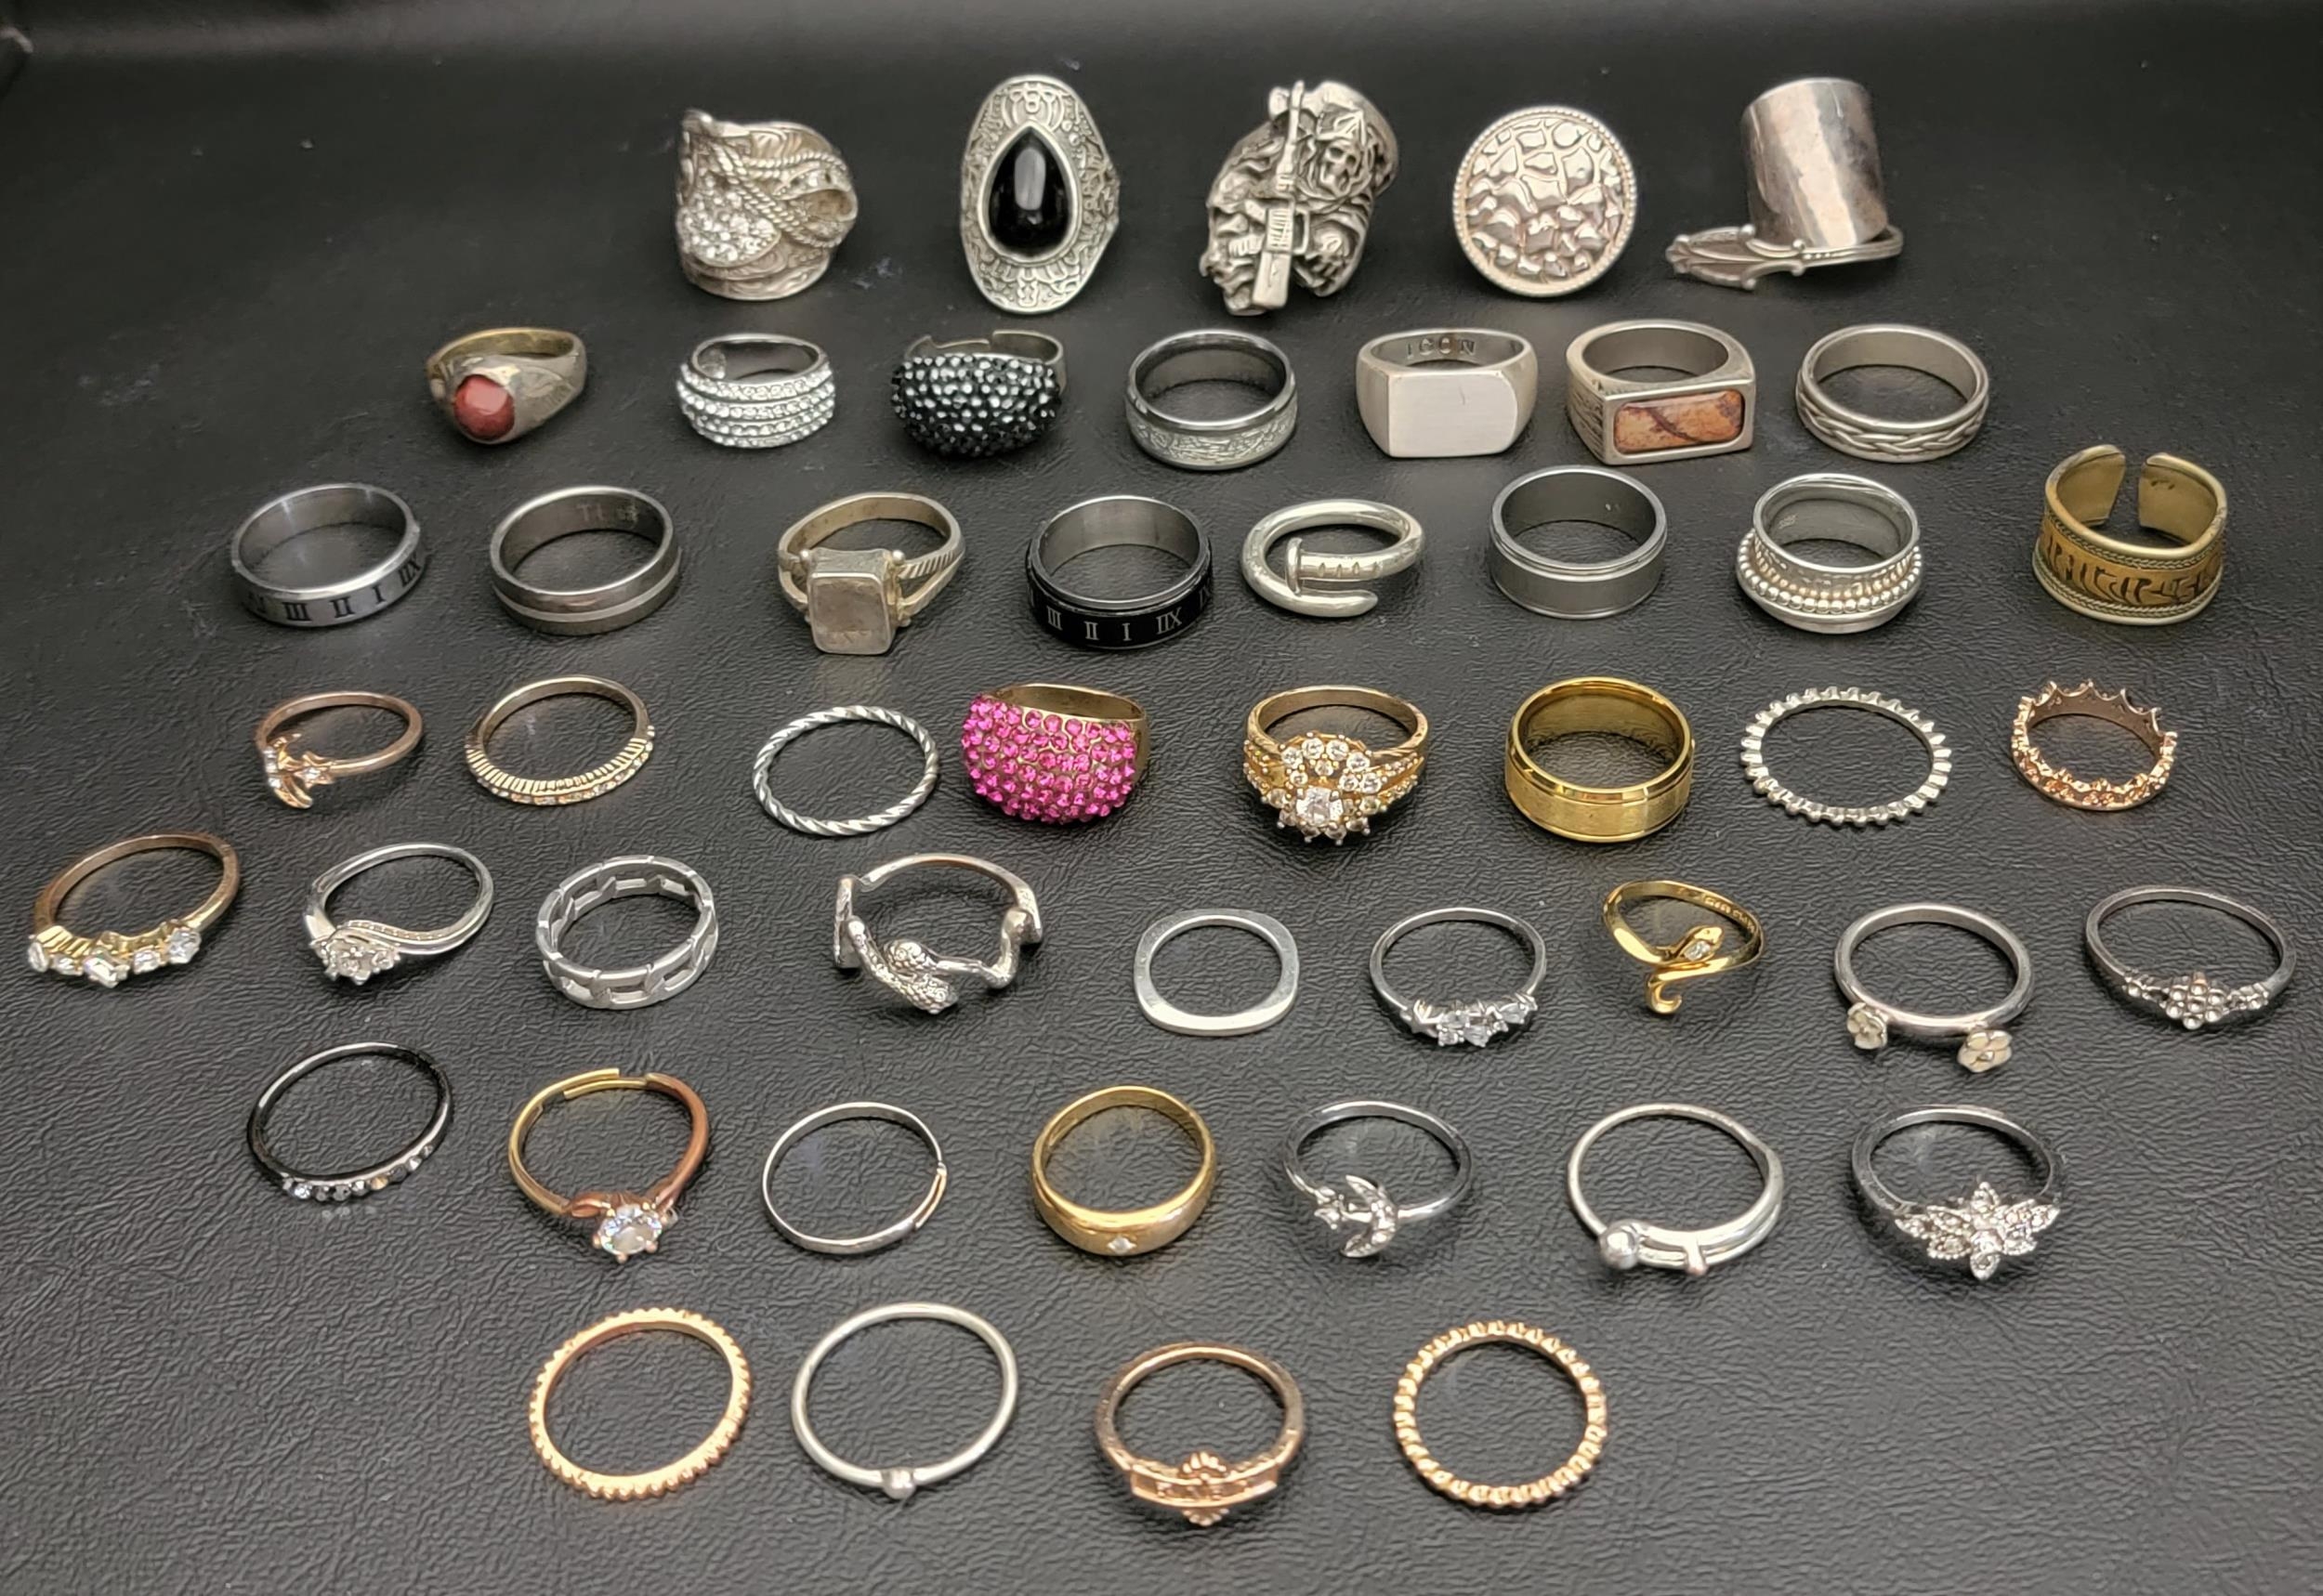 SELECTION OF SILVER AND OTHER RINGS including statement rings, stone set rings, bands and stacking